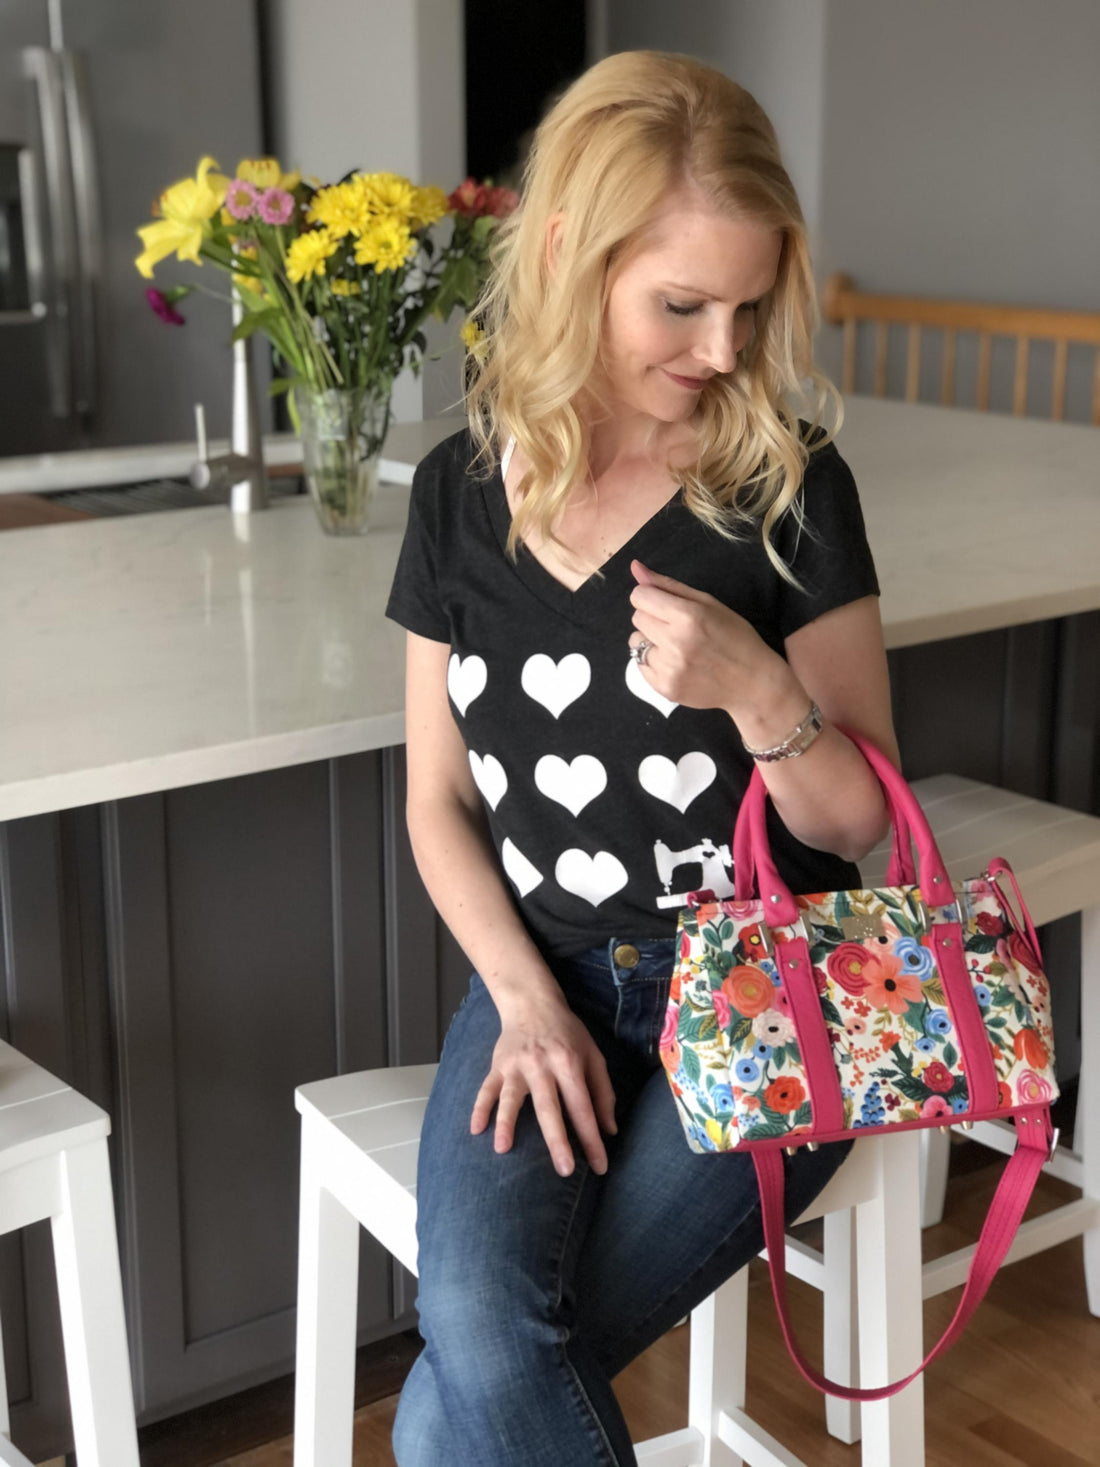 PDF Sewing Pattern to Make Hobo Bag Sling Tote Leona INSTANT 